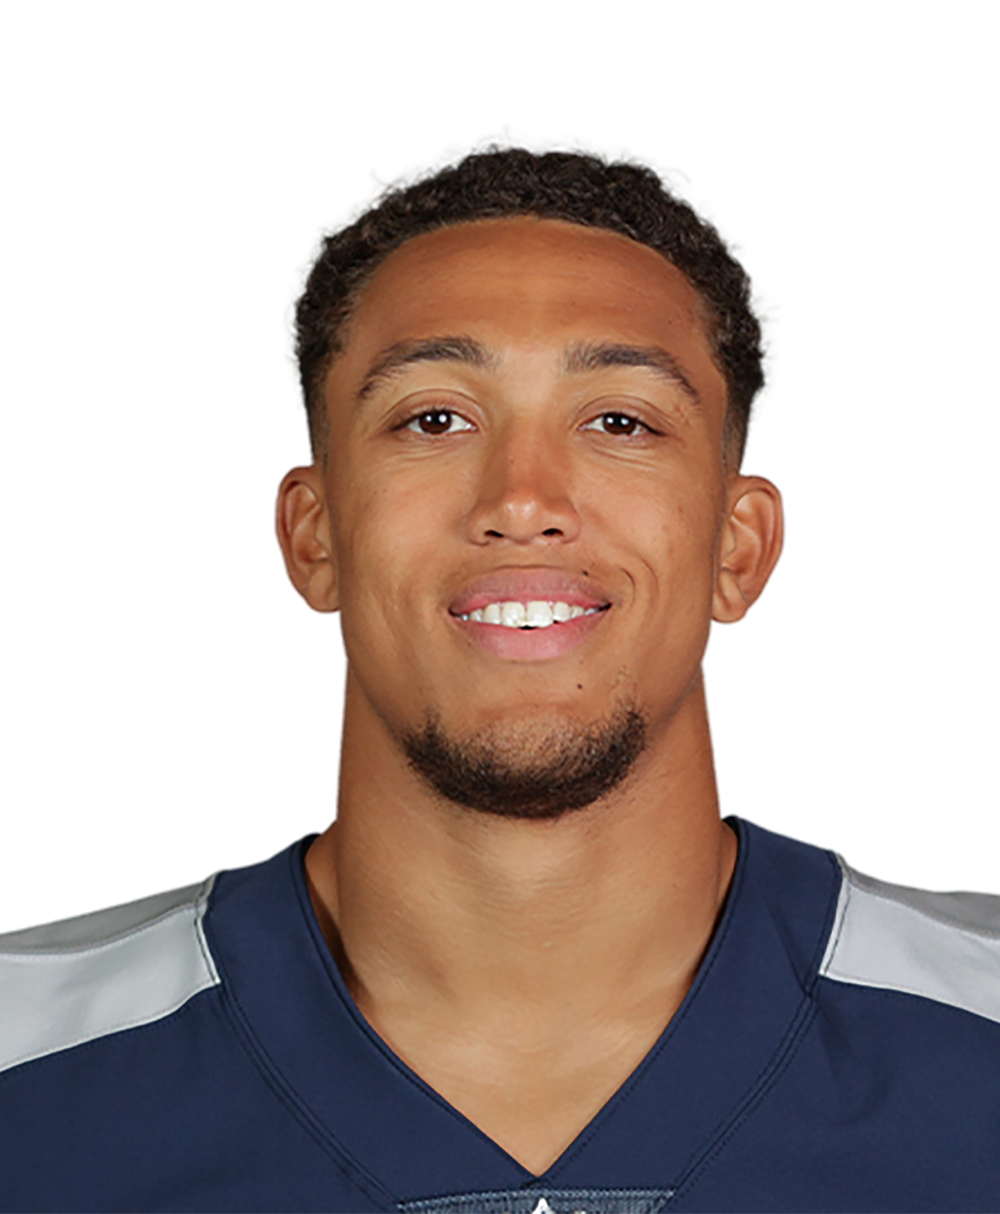 Nick Westbrook-Ikhine Stats, Profile, Bio, Analysis and More, Tennessee  Titans